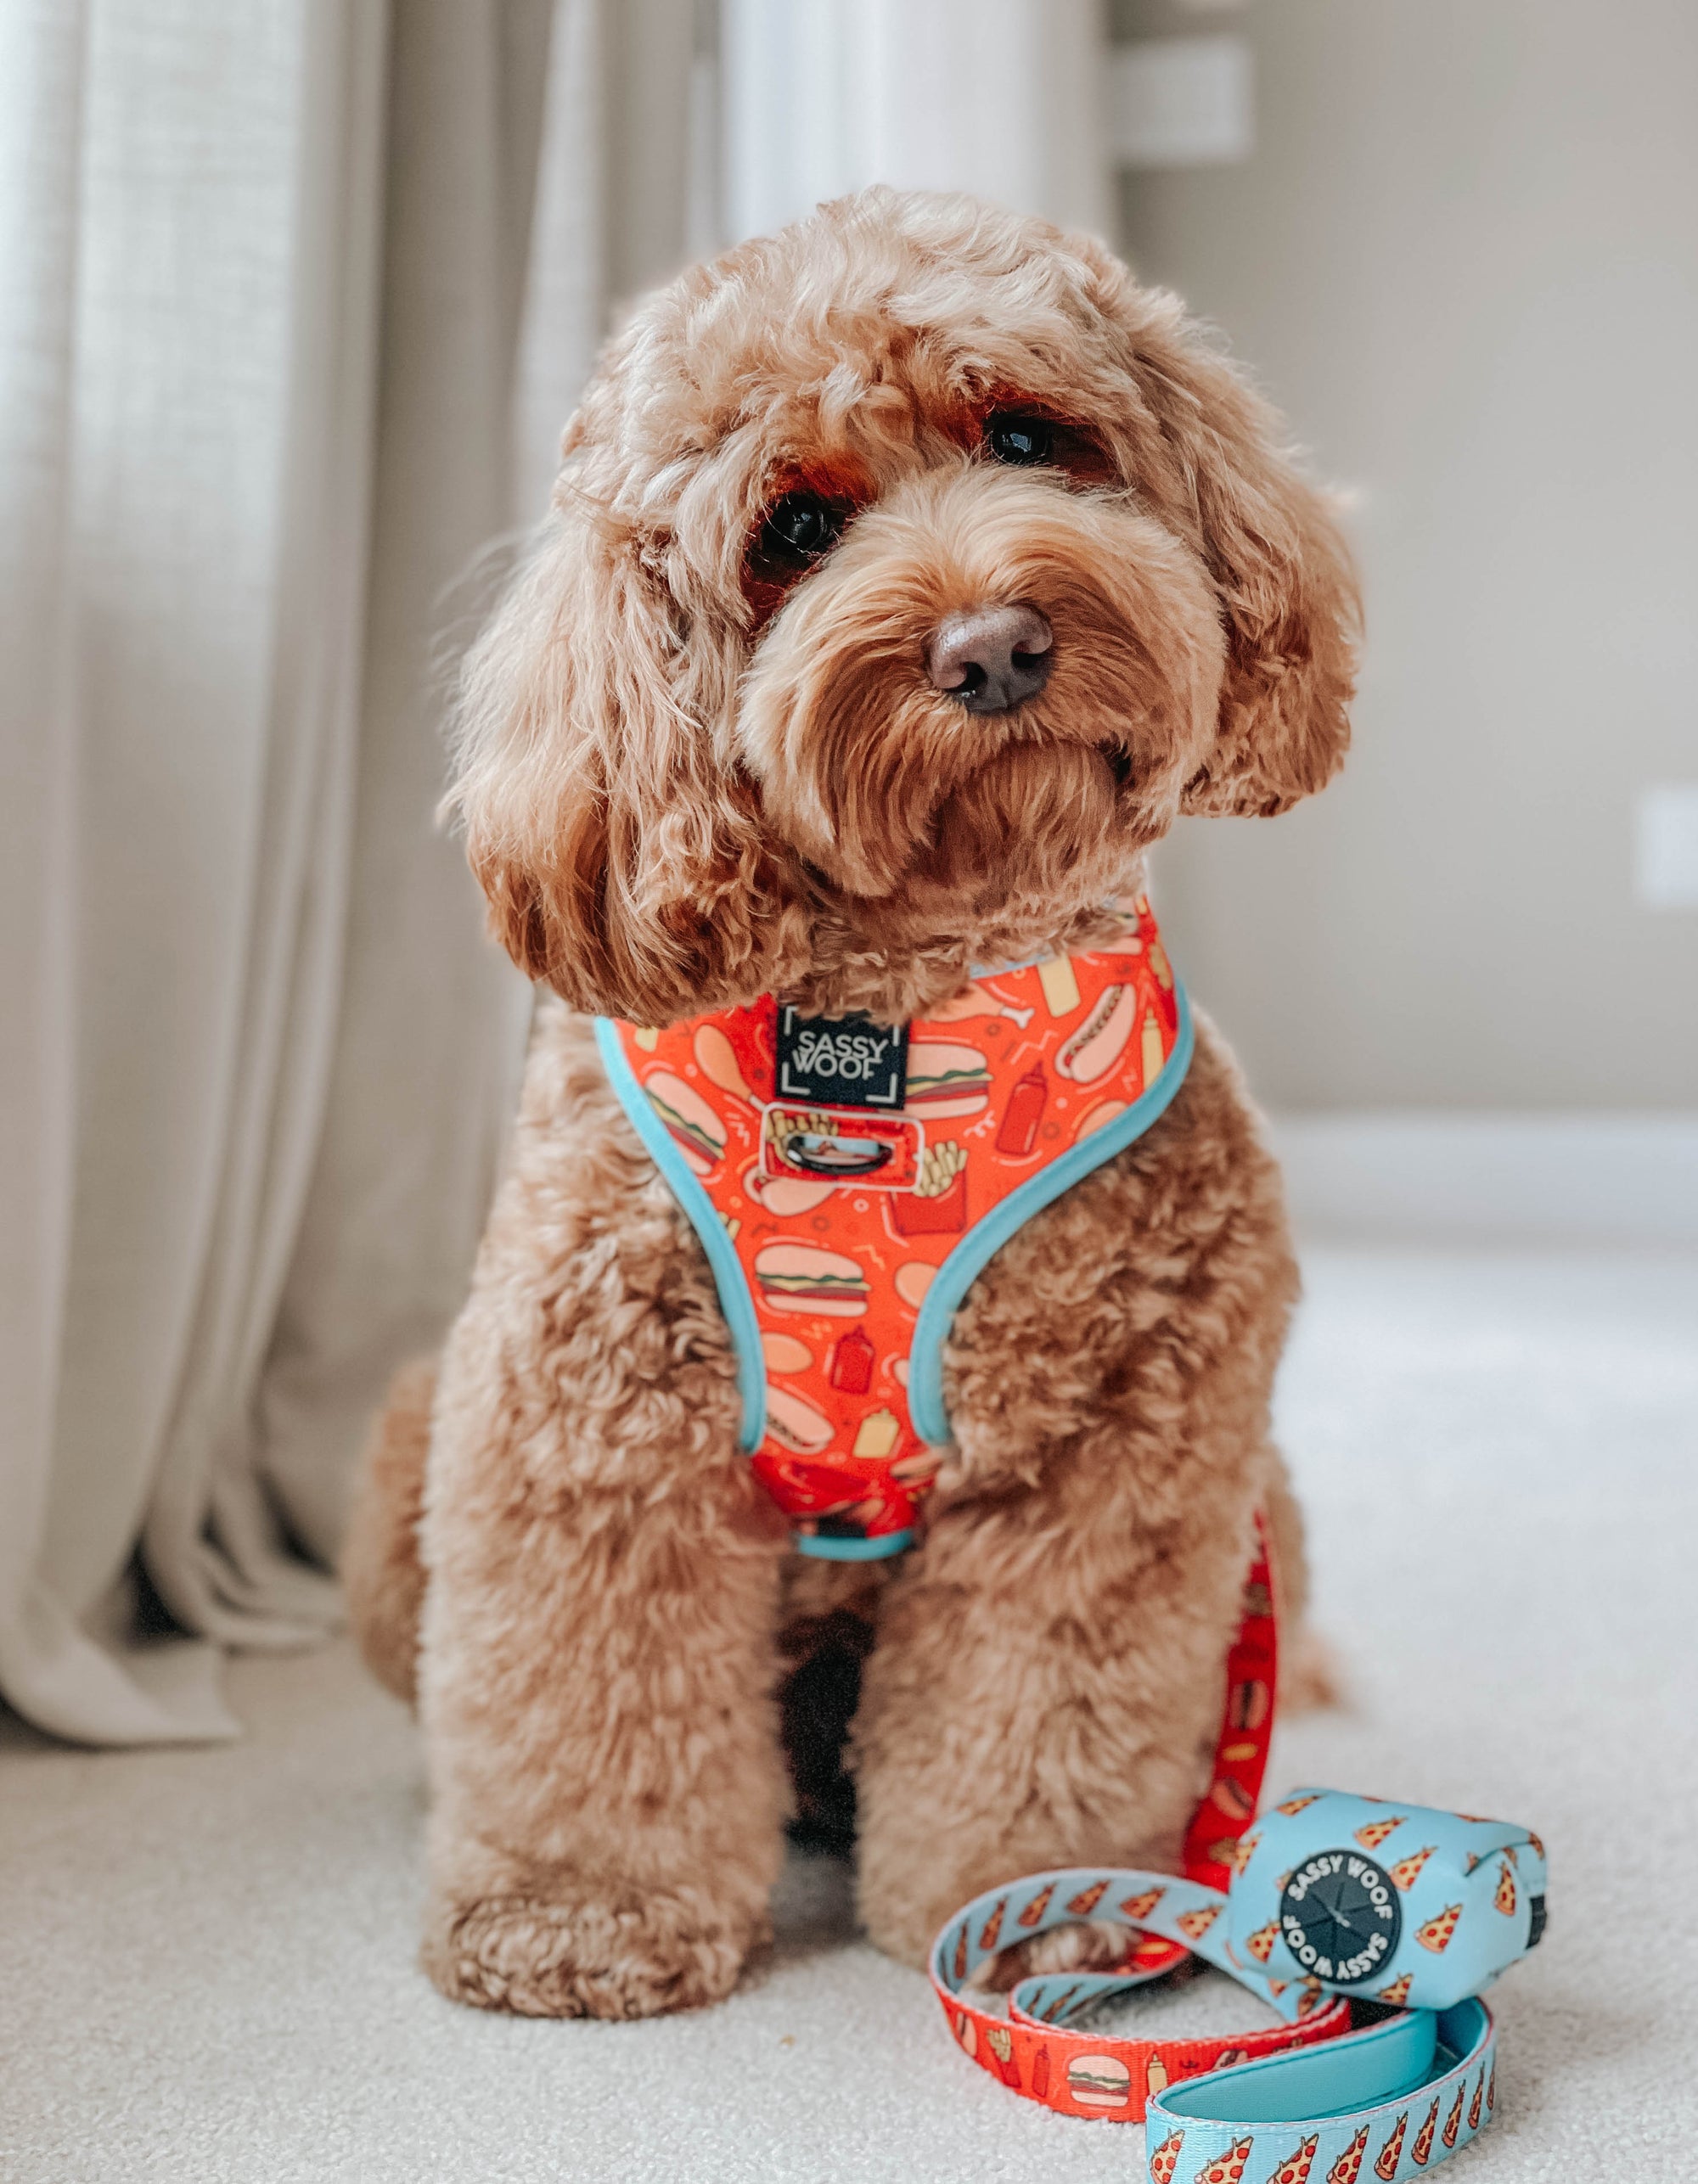 INFLUENCER_CONTENT | @INDY.THECOCKAPOO | SIZE L